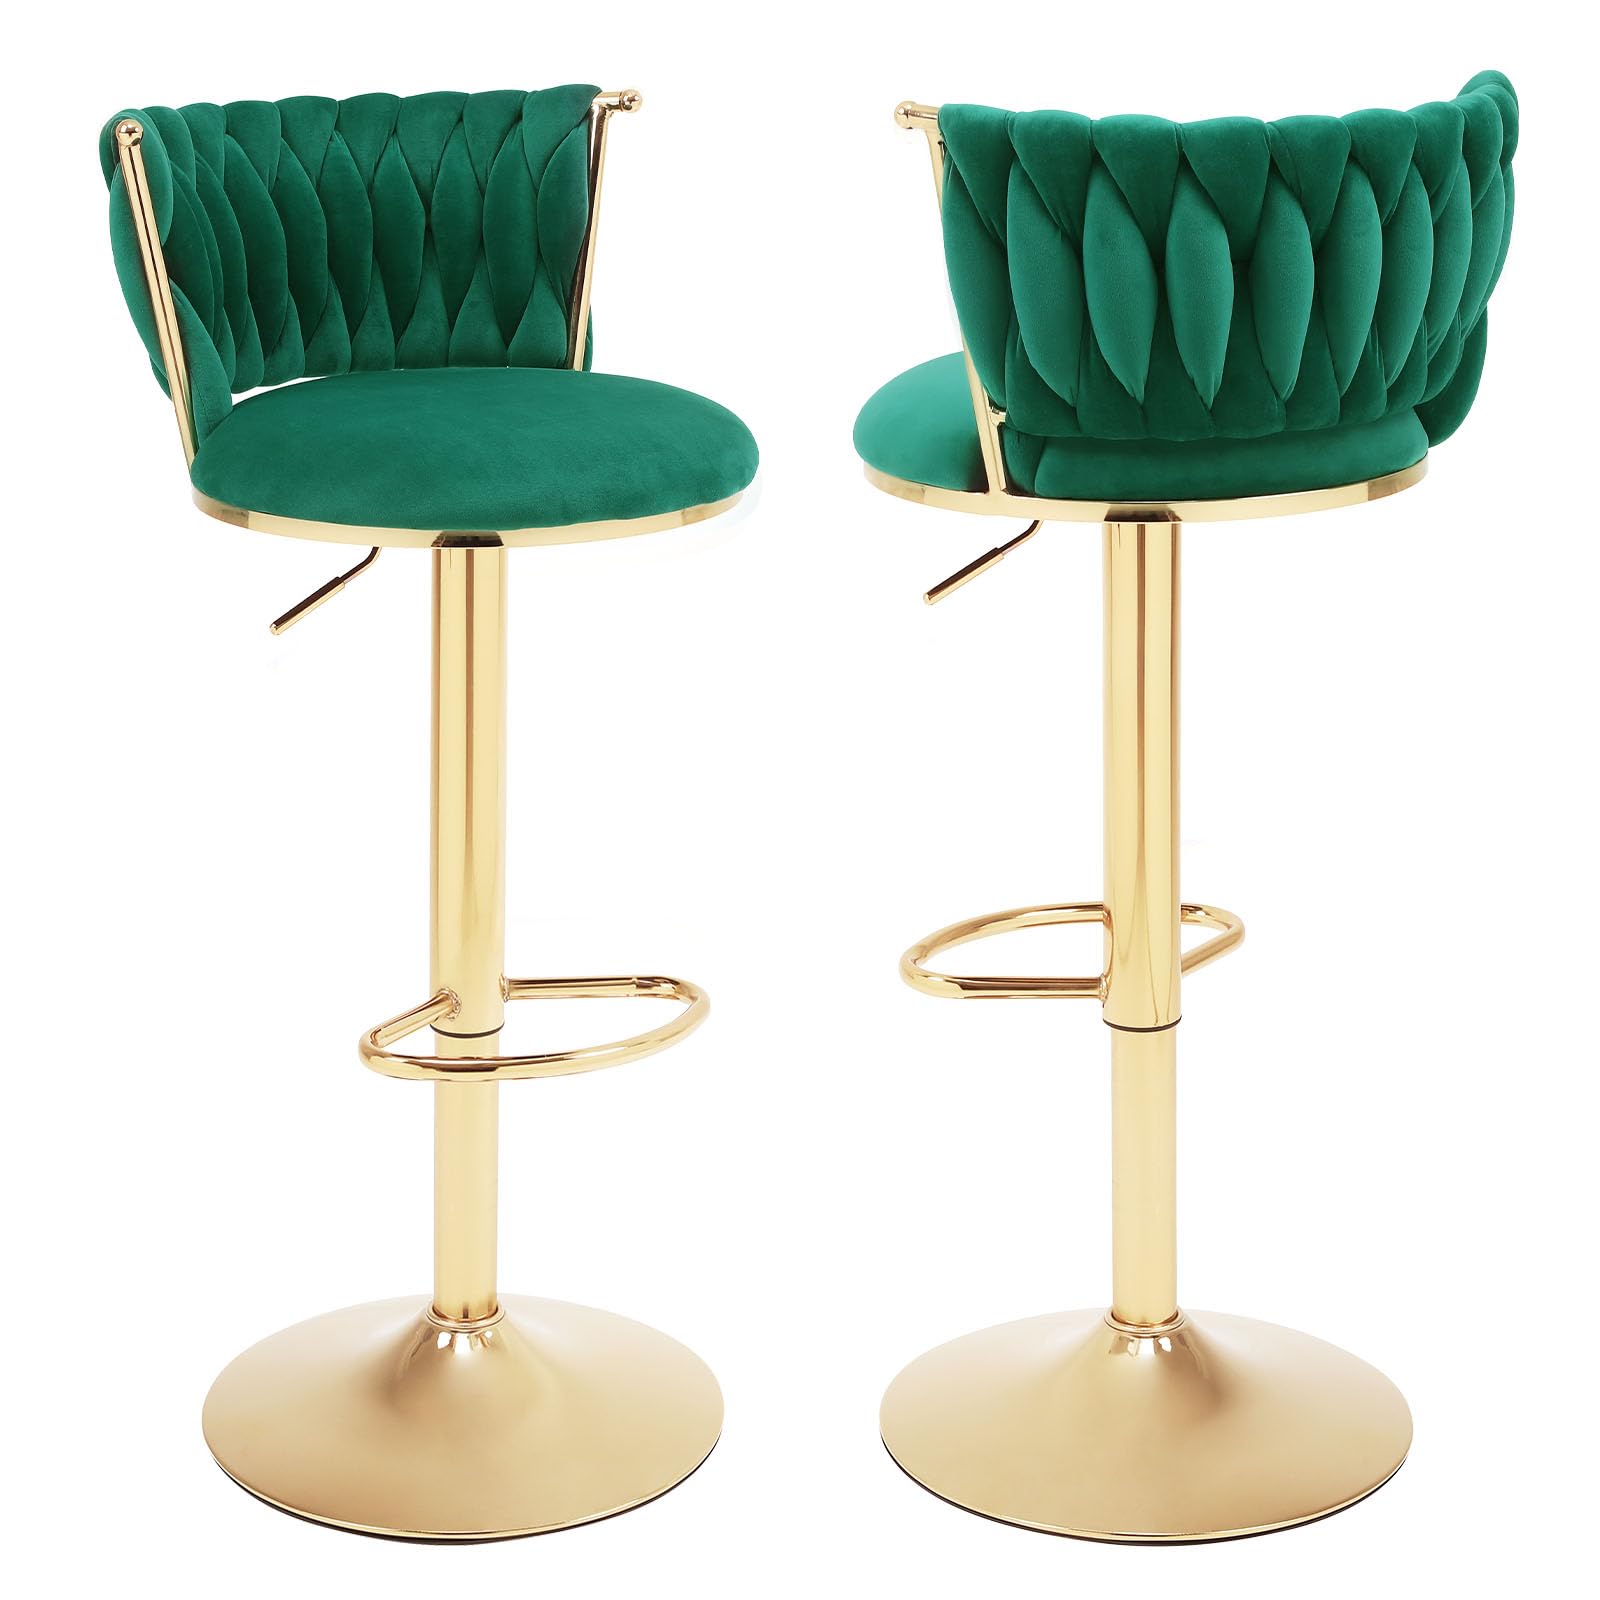 HANLIVES Velvet Bar Stools Set of 2,360° Woven Modern Gold Bar Stools,Swivel Adjustable Height Barstools with Backs Gold Metal Tall Kitchen Counter Chairs for Bar Pub Cafe(Green*2)